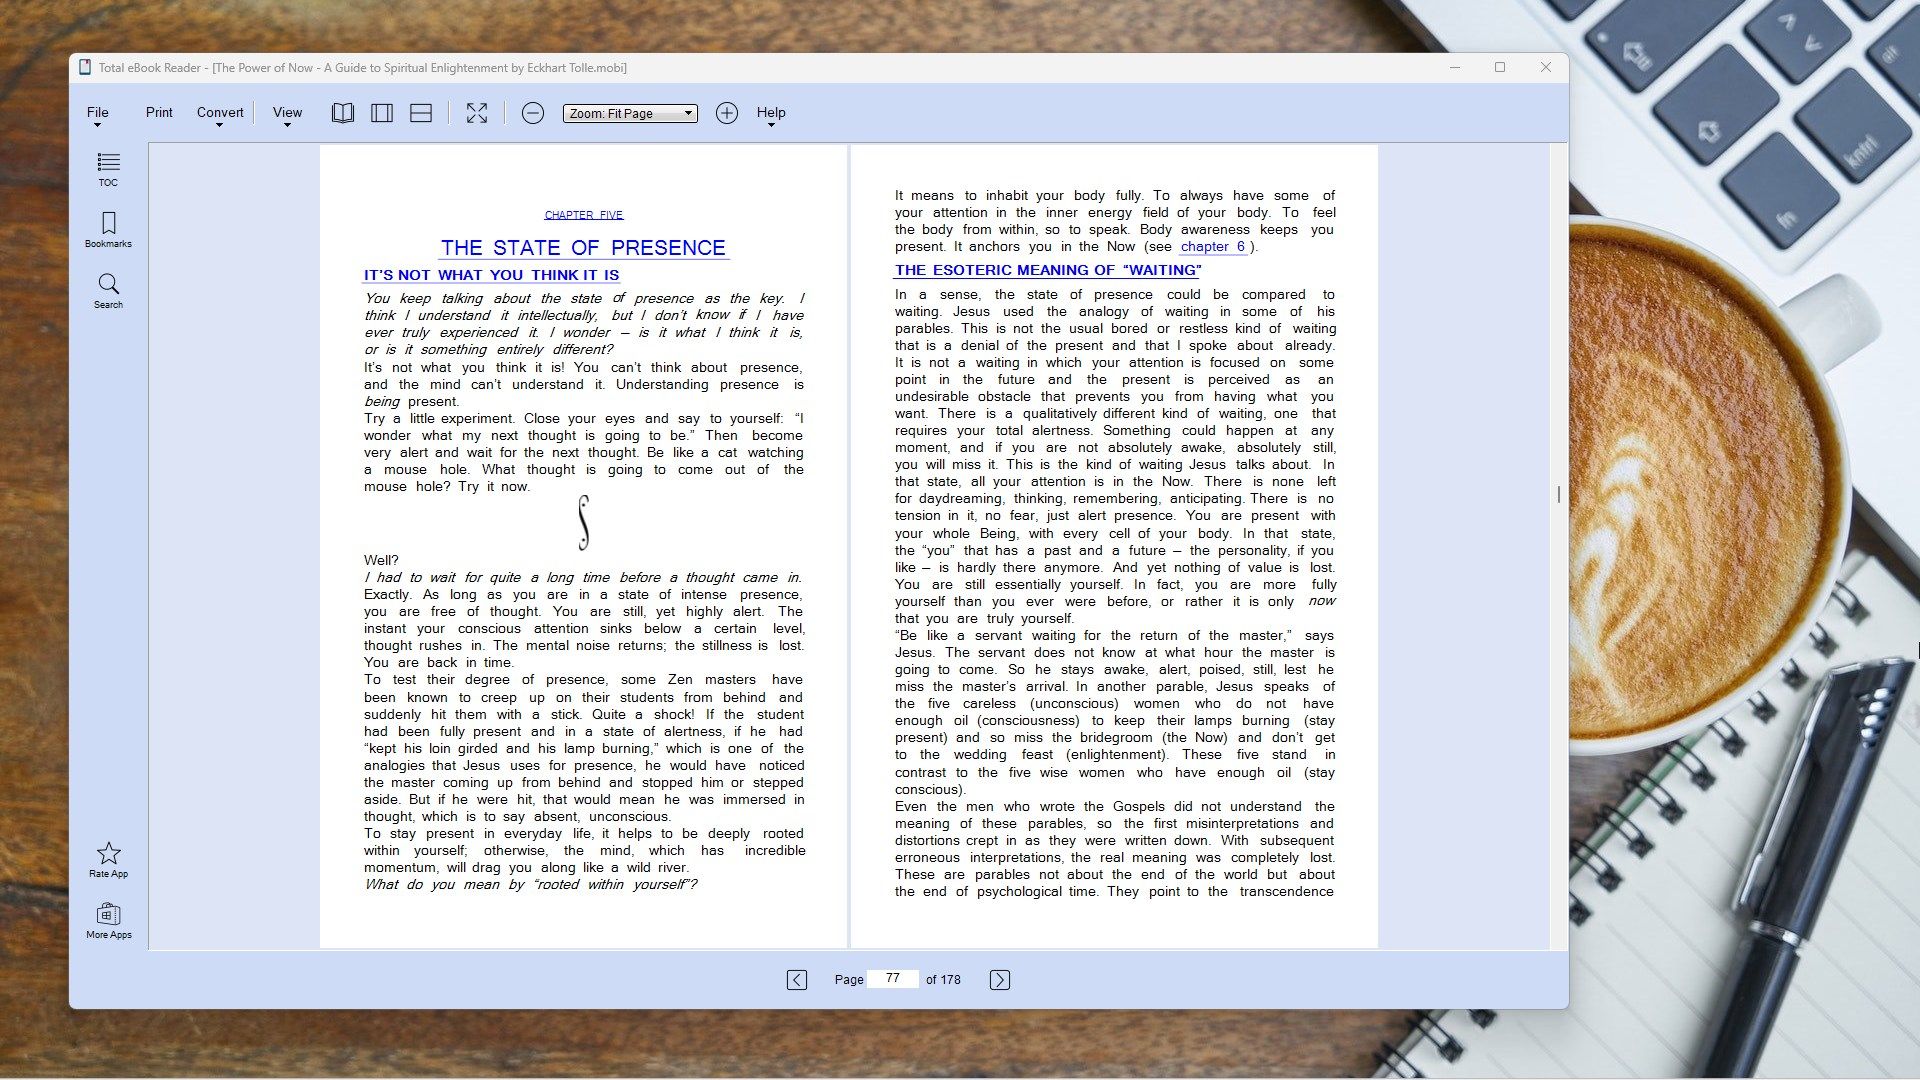 Total eBook Reader supports eBook and document formats: PDF, EPUB, MOBI, XPS, and OXPS